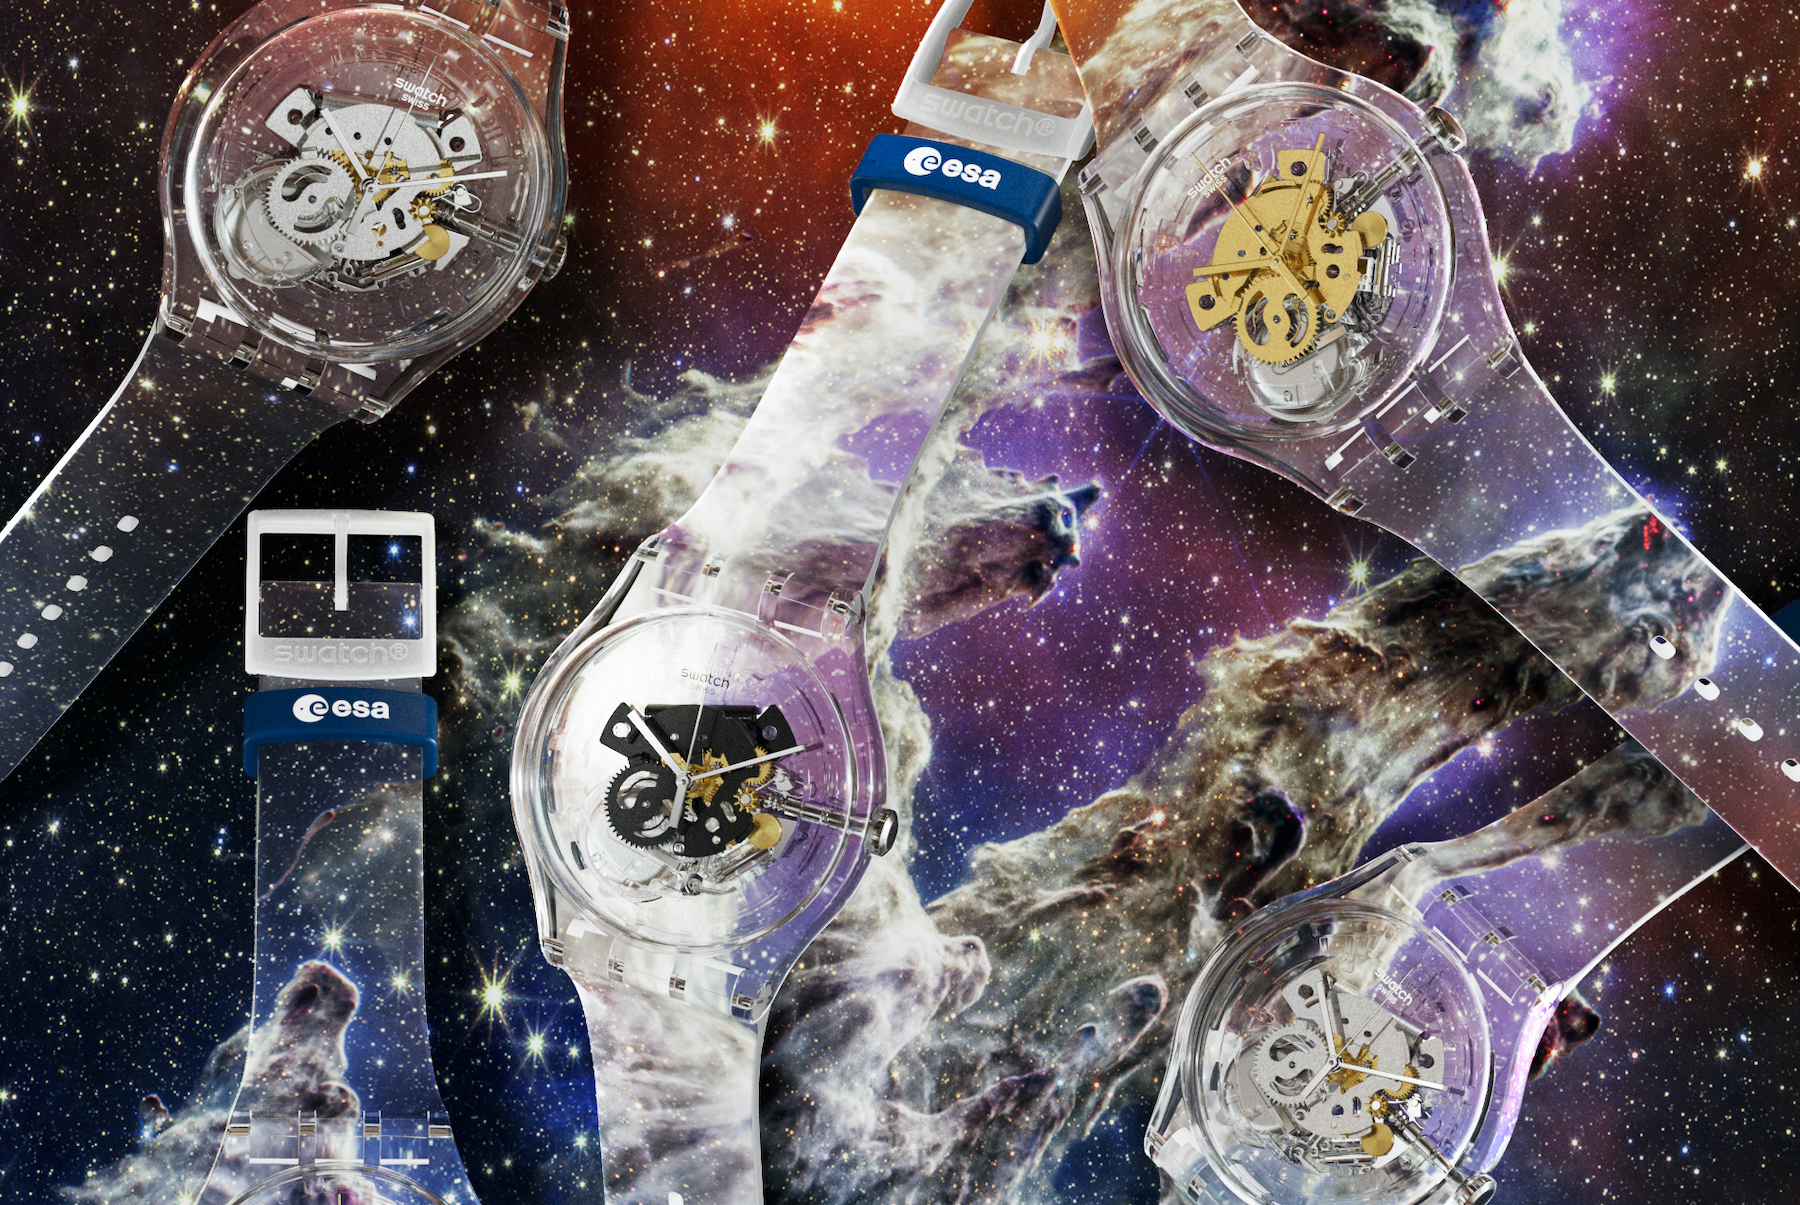 New Swatch designs featuring images captured by the James Webb Space Telescope.